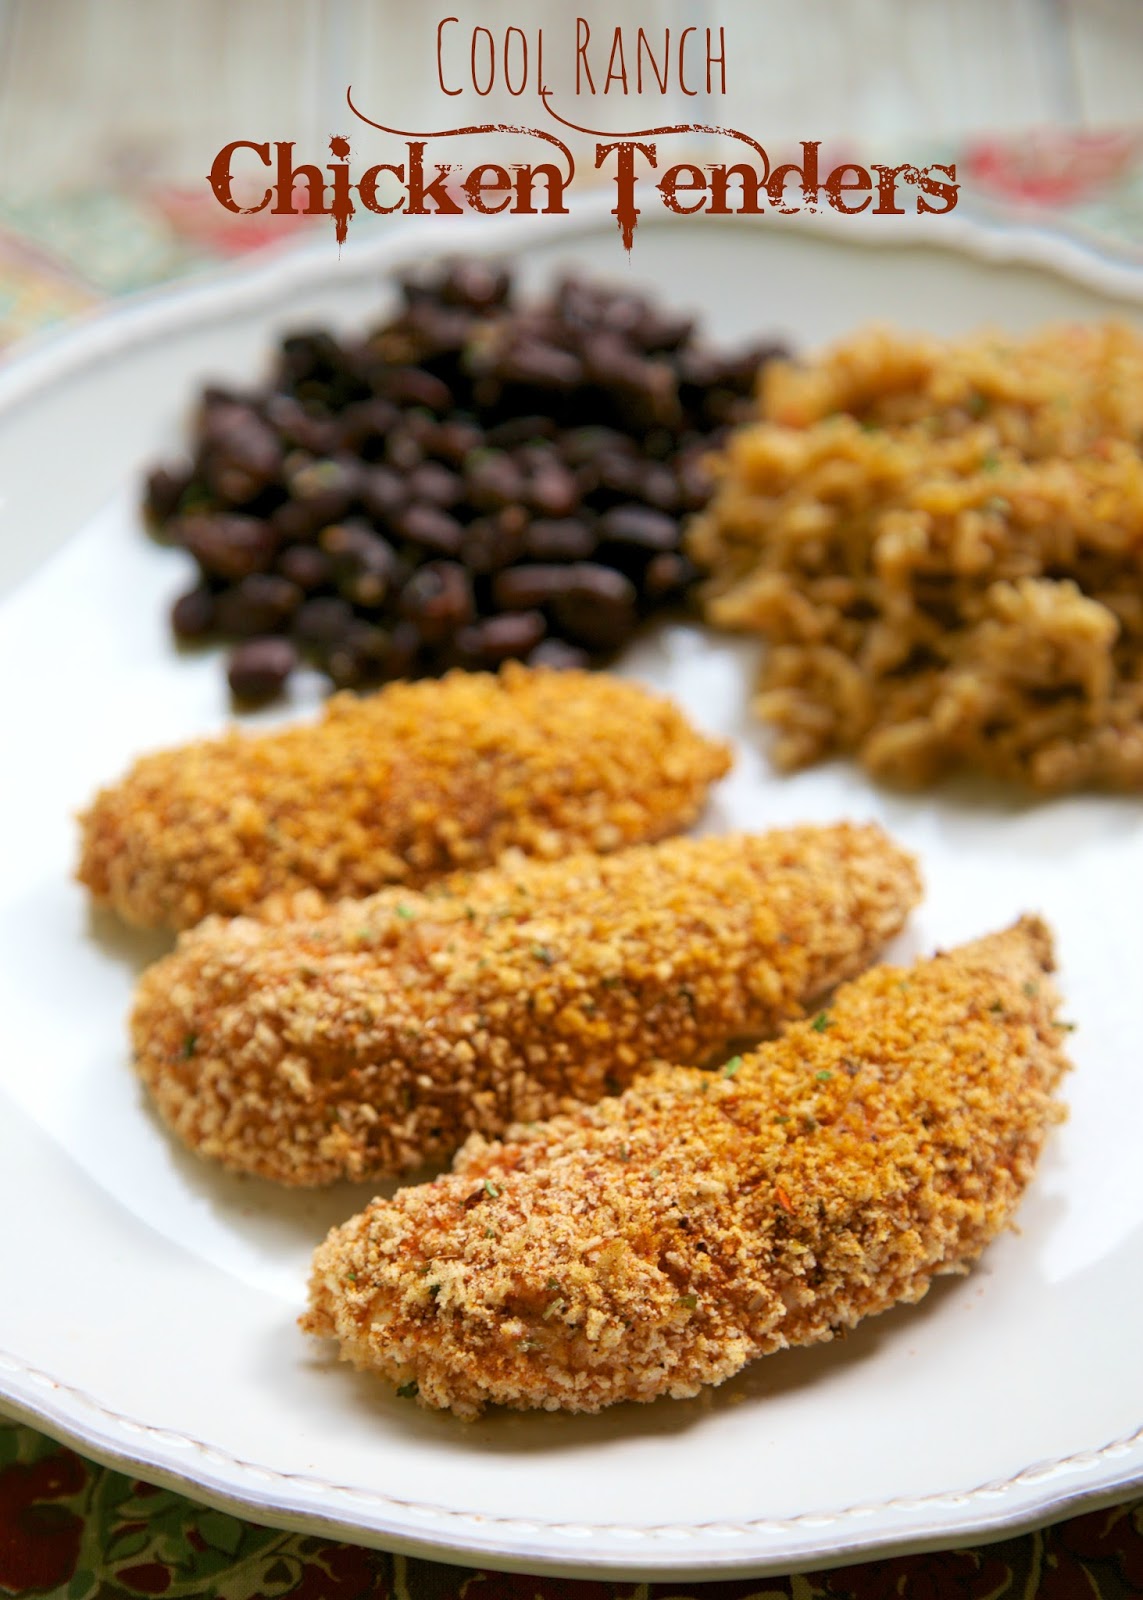 Cool Ranch Chicken Tenders recipe - chicken tenders coated in taco seasoning and ranch - baked not fried! Ready in 15 minutes!! Can coat tenders and freeze uncooked for later.